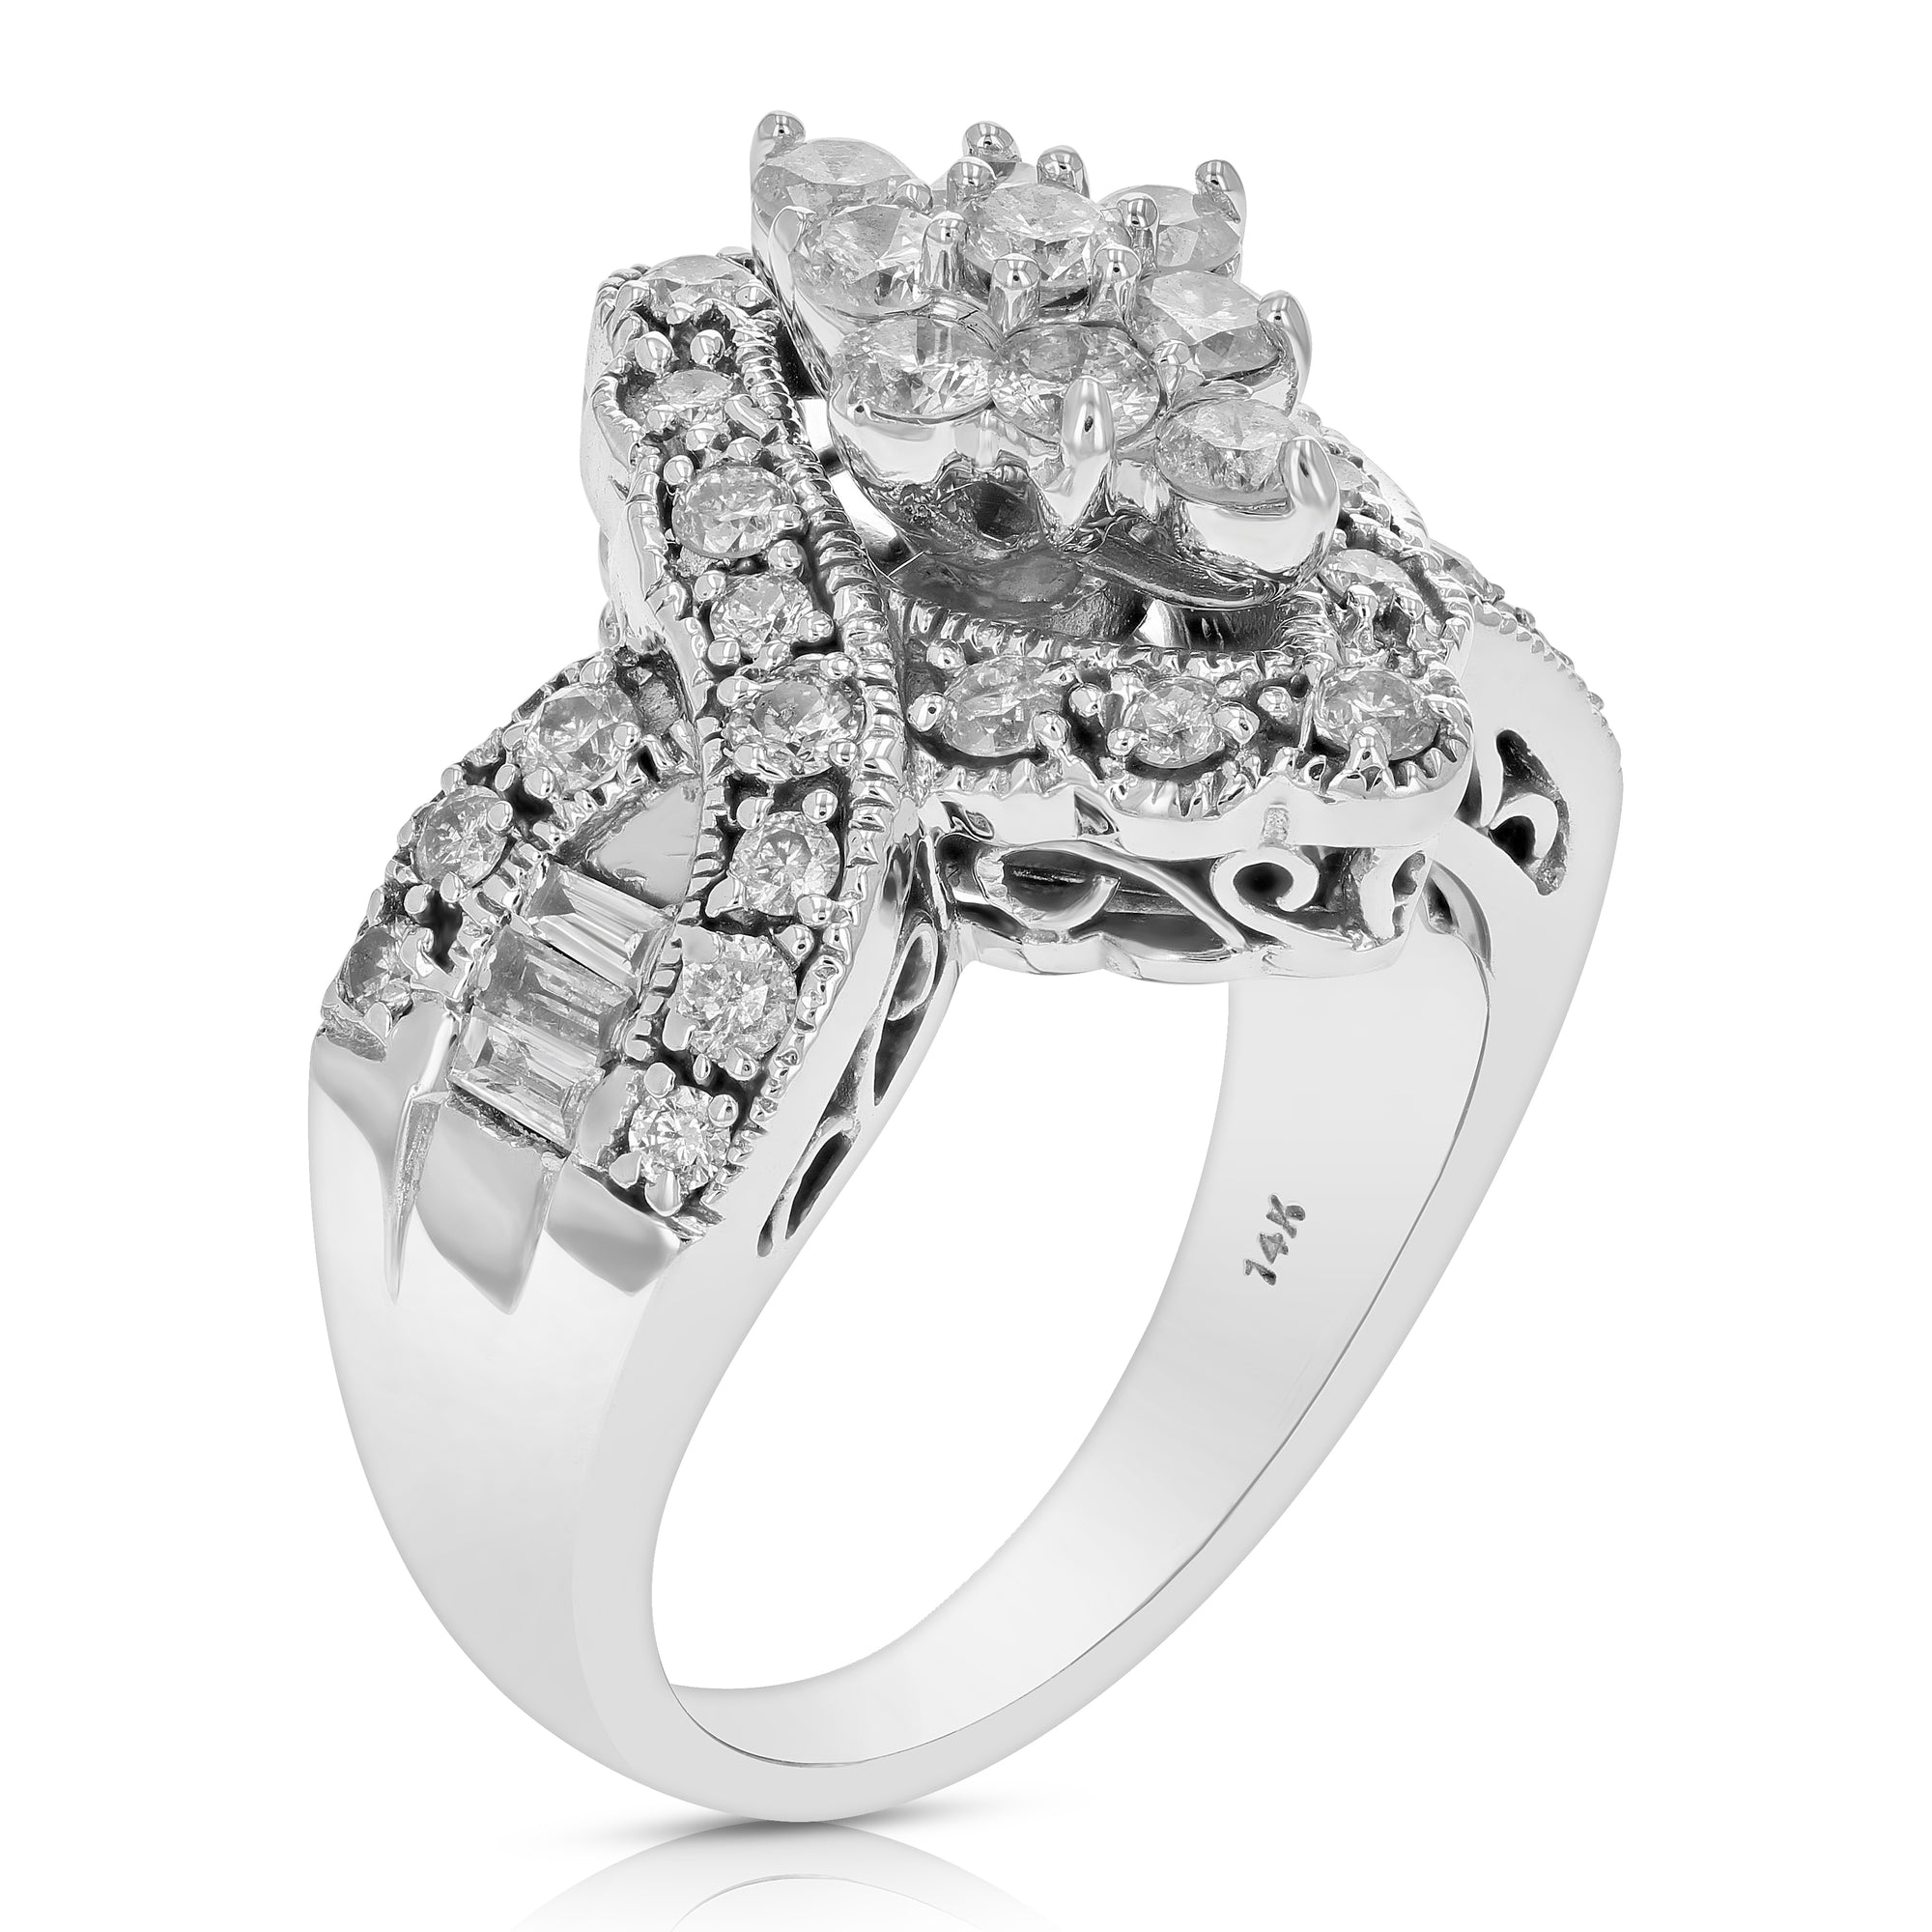 1 cttw Marquise Shape Diamond Cocktail Ring 14K White Gold Round Prong Size 6.5